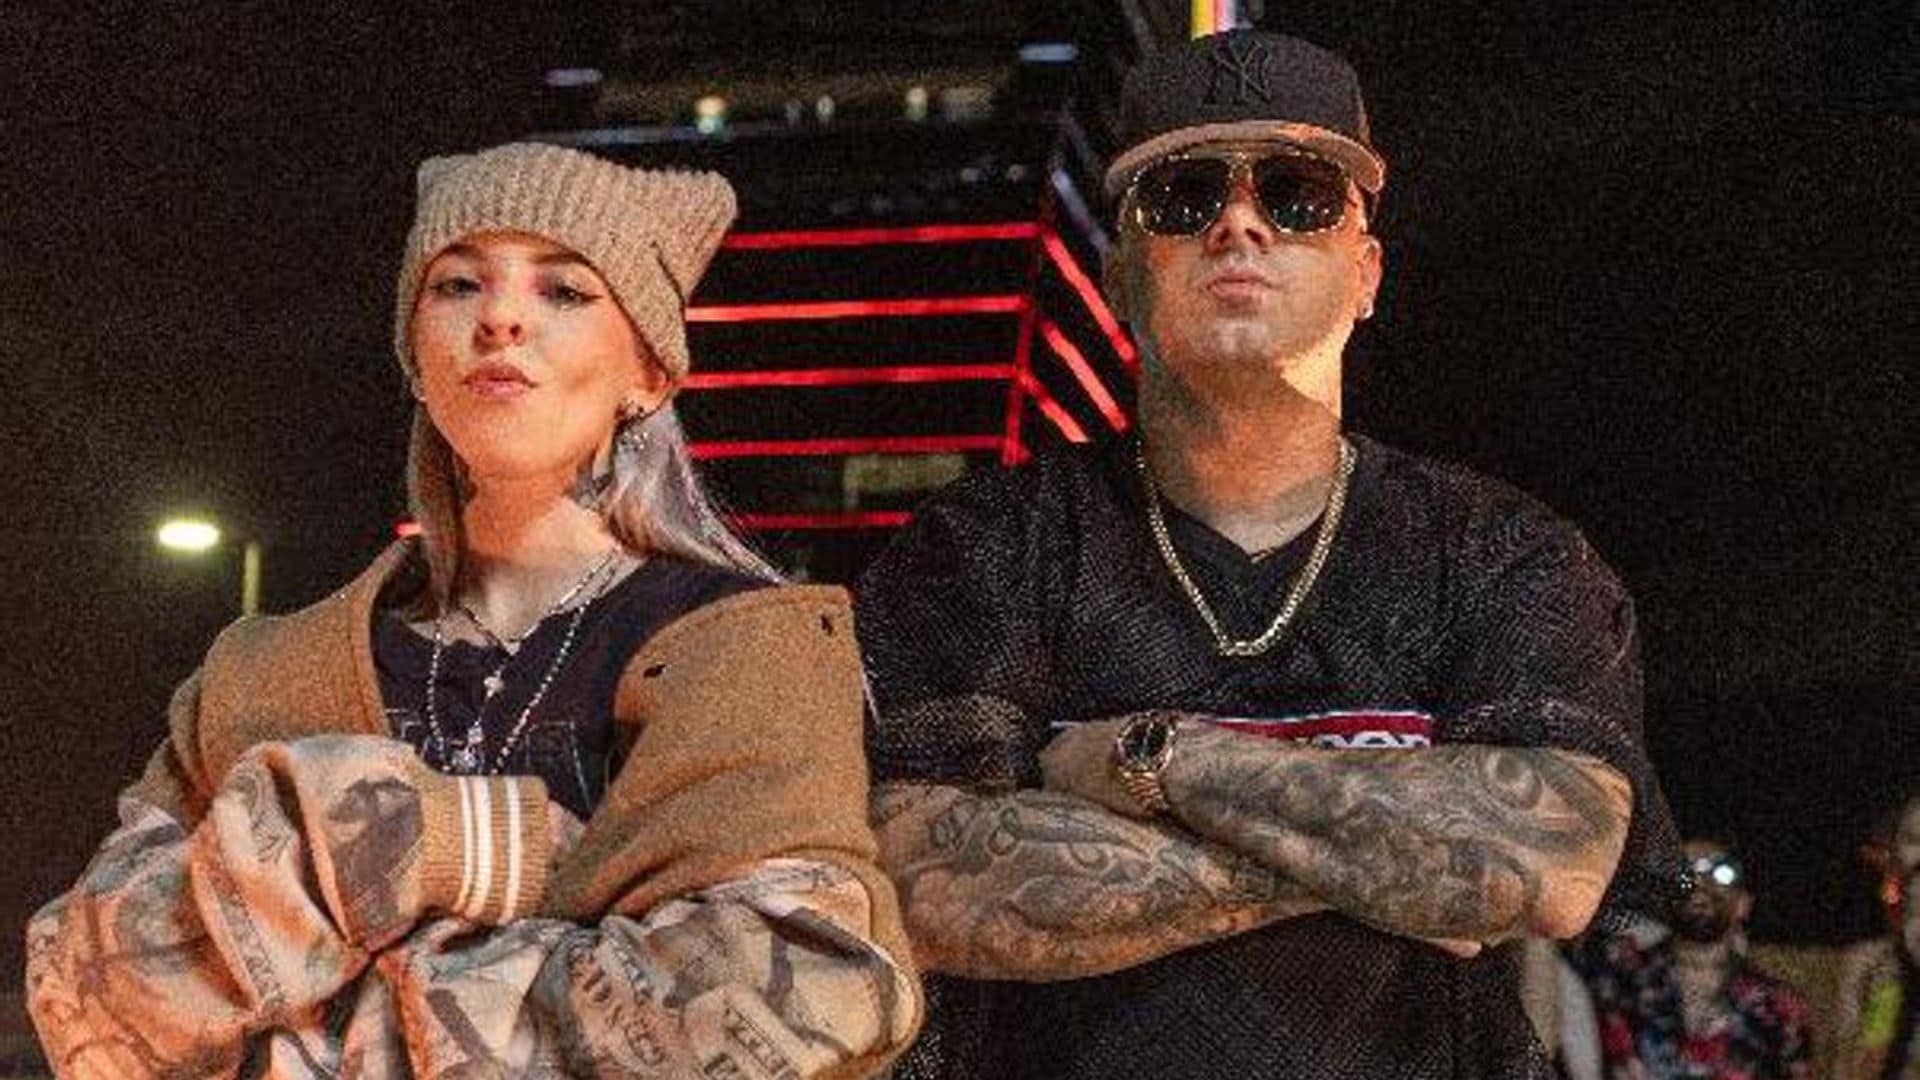 New Music Friday: Wisin, Young Miko, Carin Leon, Grupo Frontera, and more